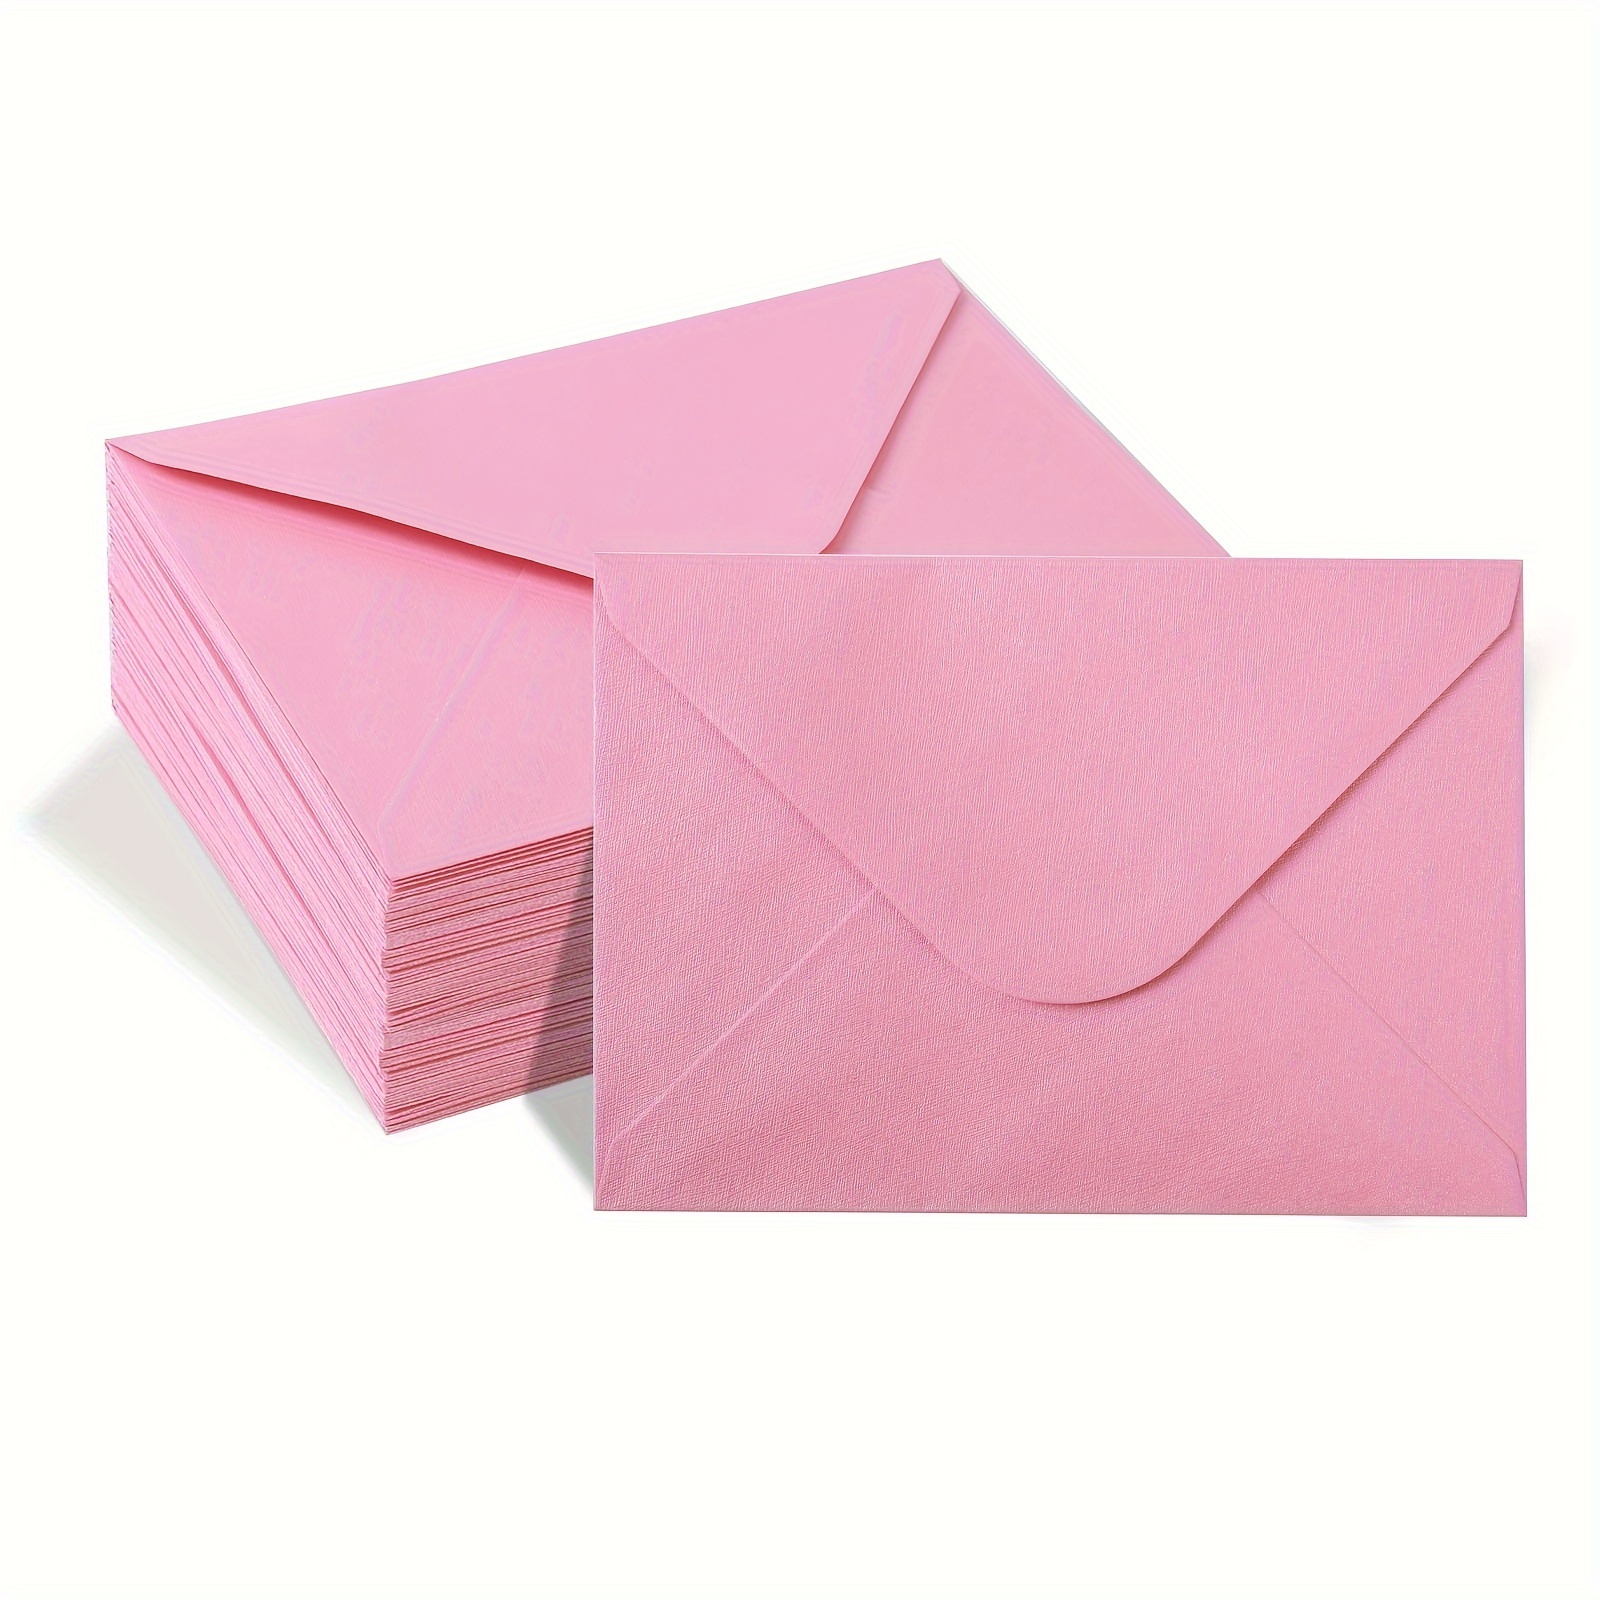 

10pcs, A6 Envelopes Envelopes For Greeting Cards, Birthday, Weddings, Baby Shower Invitation Cards, Small Business Supplies, Thank You Cards, Birthday Gift, Cards, Unusual Items, Gift Cards